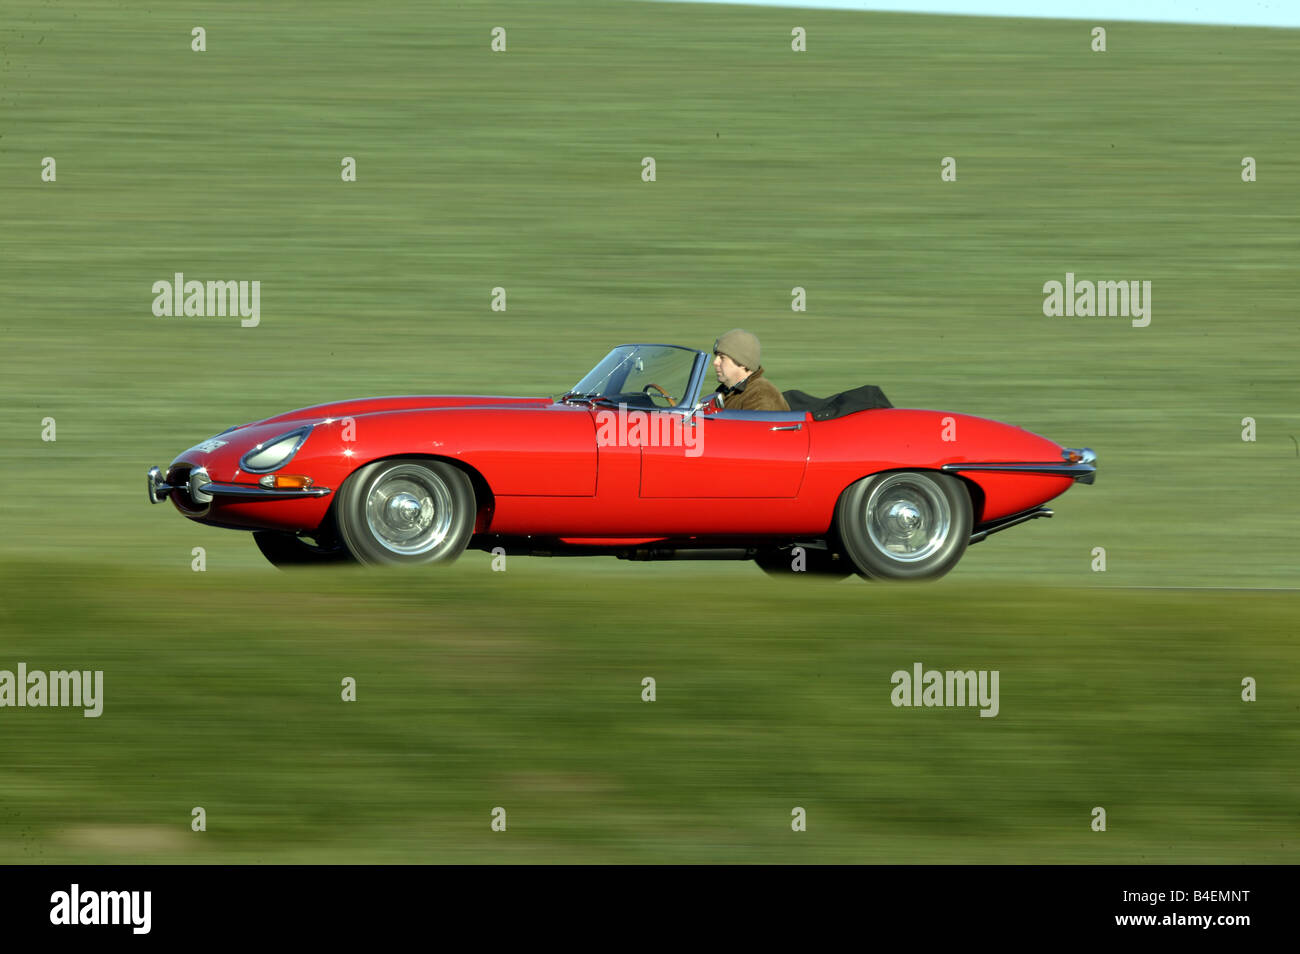 Car, Jaguar E-Type S1 4.2, model year 1965, convertible, vintage car, 1960s, sixties, red, 265 PS, convertible top, open, drivin Stock Photo